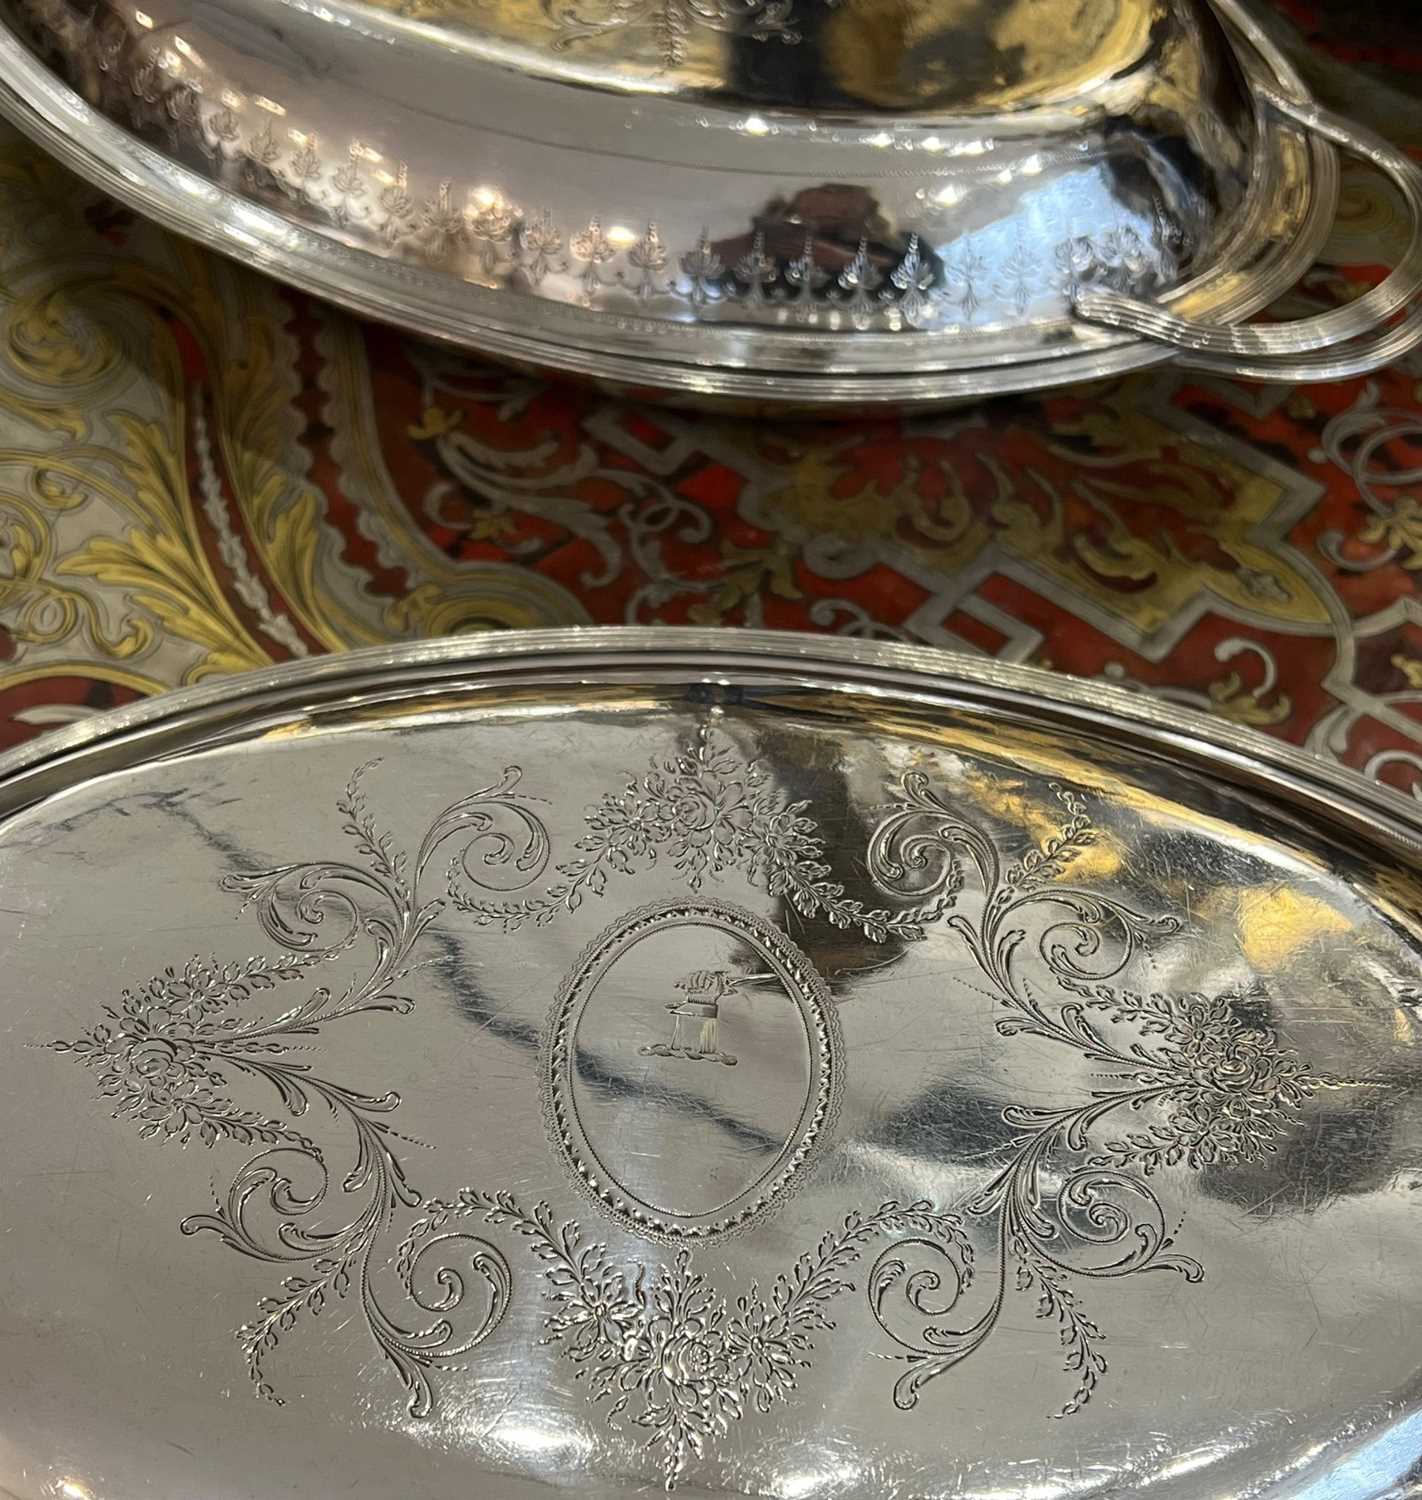 A PAIR OF 18TH CENTURY STERLING SILVER HASH DISHES BY PETER & ANN BATEMAN, 1798 - Image 10 of 10